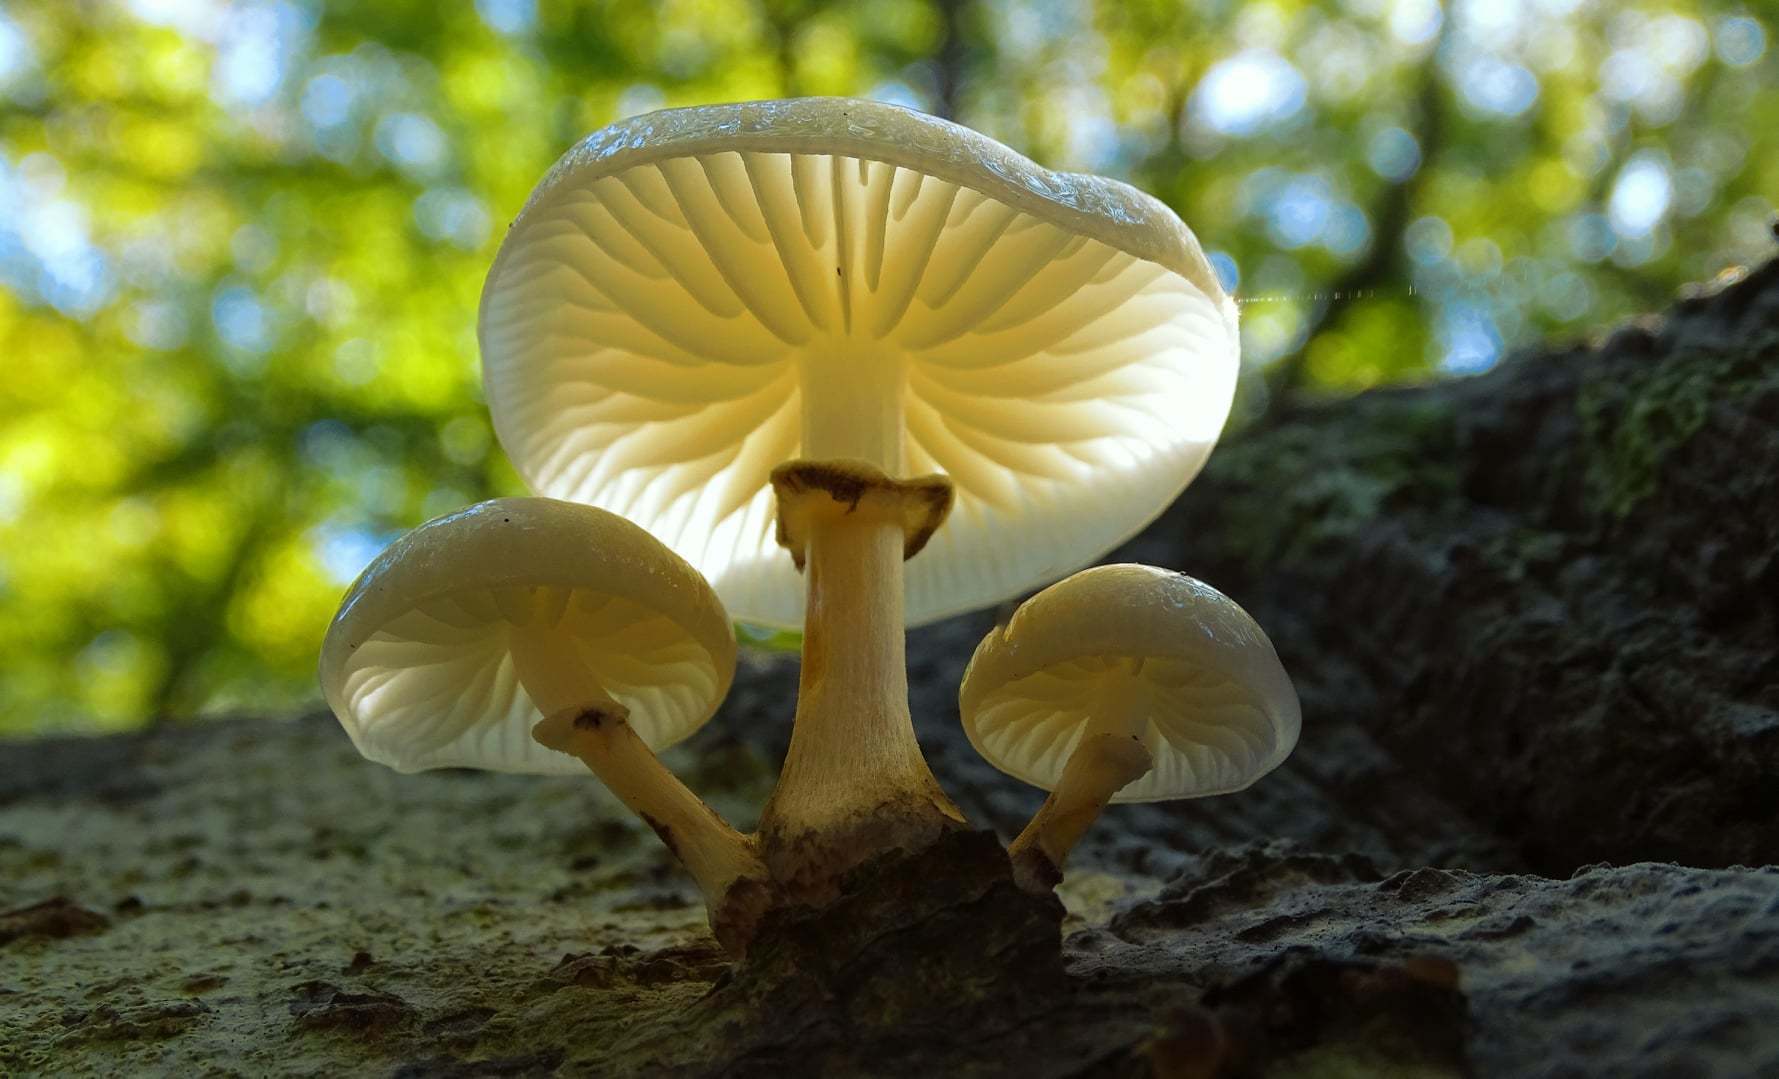 Second place: Porcelain fungi in the New Forest at Bramshaw wood By Peter Norton